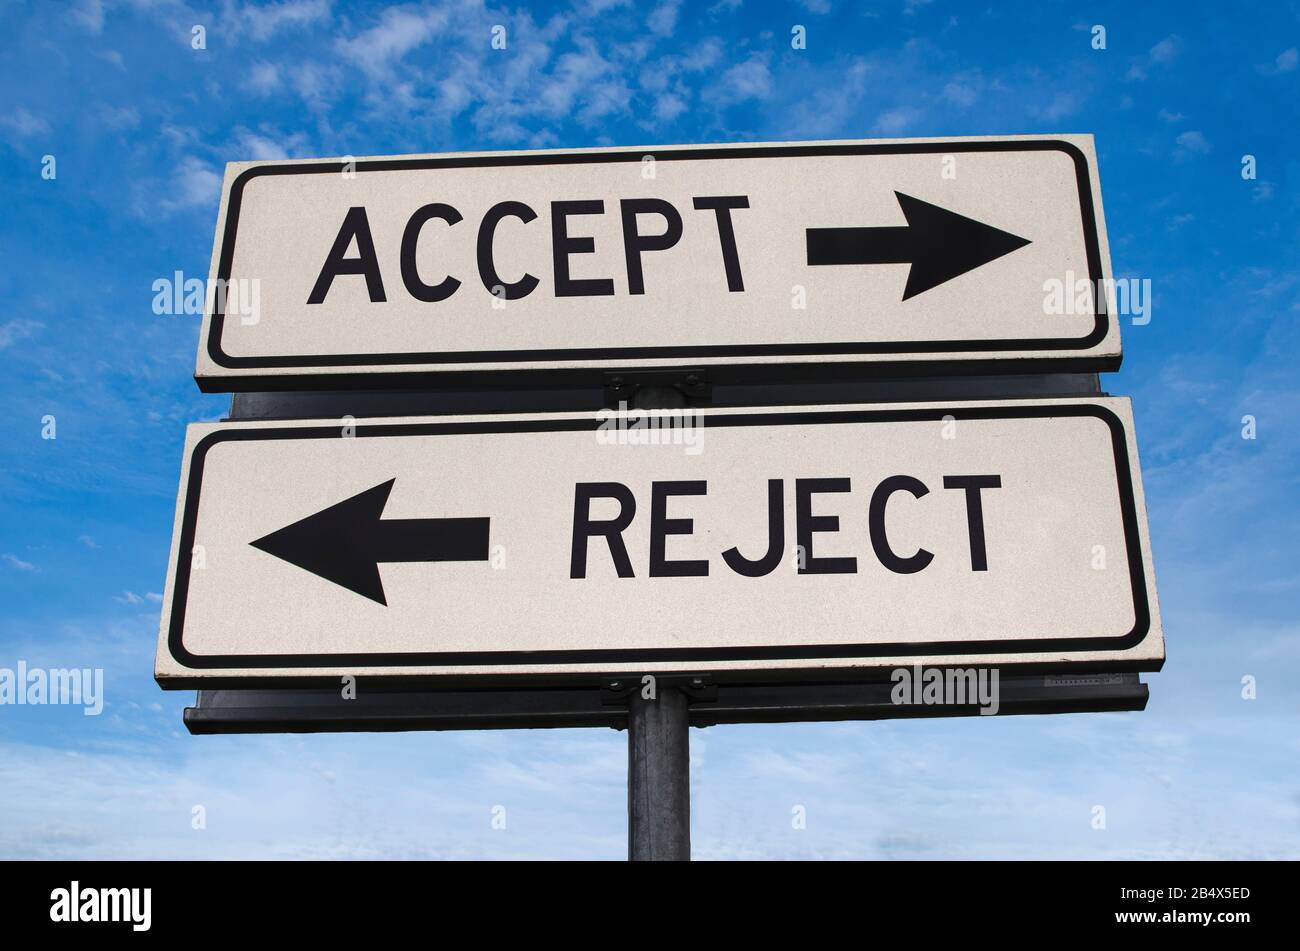 Accept vs reject. White two street signs with arrow on metal pole with word. Directional road. Crossroads Road Sign, Two Arrow. Blue sky background. Stock Photo